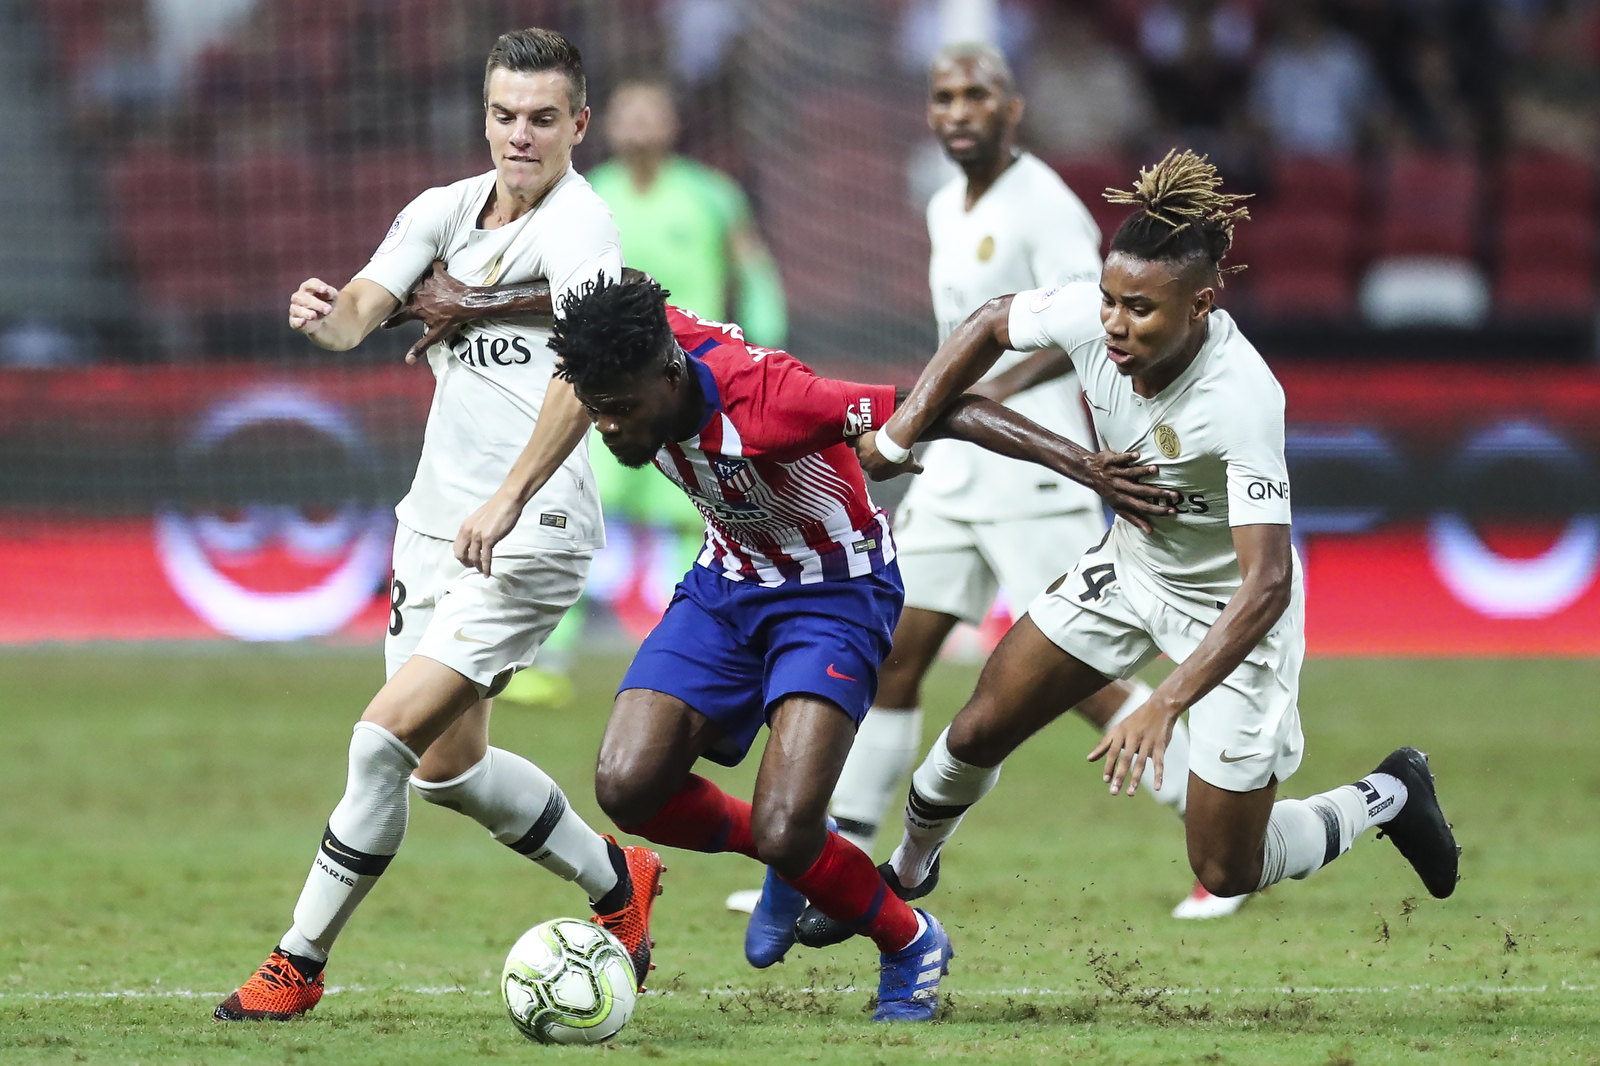  Atletico Madrid’s Thomas Partey, center, controls the ball against Paris Saint-Germain’s Giovani Lo Celso, left, and Christopher Nkunku  during the International Champions Cup match between Paris Saint-Germain and Atletico Madrid in Singapore, Monda